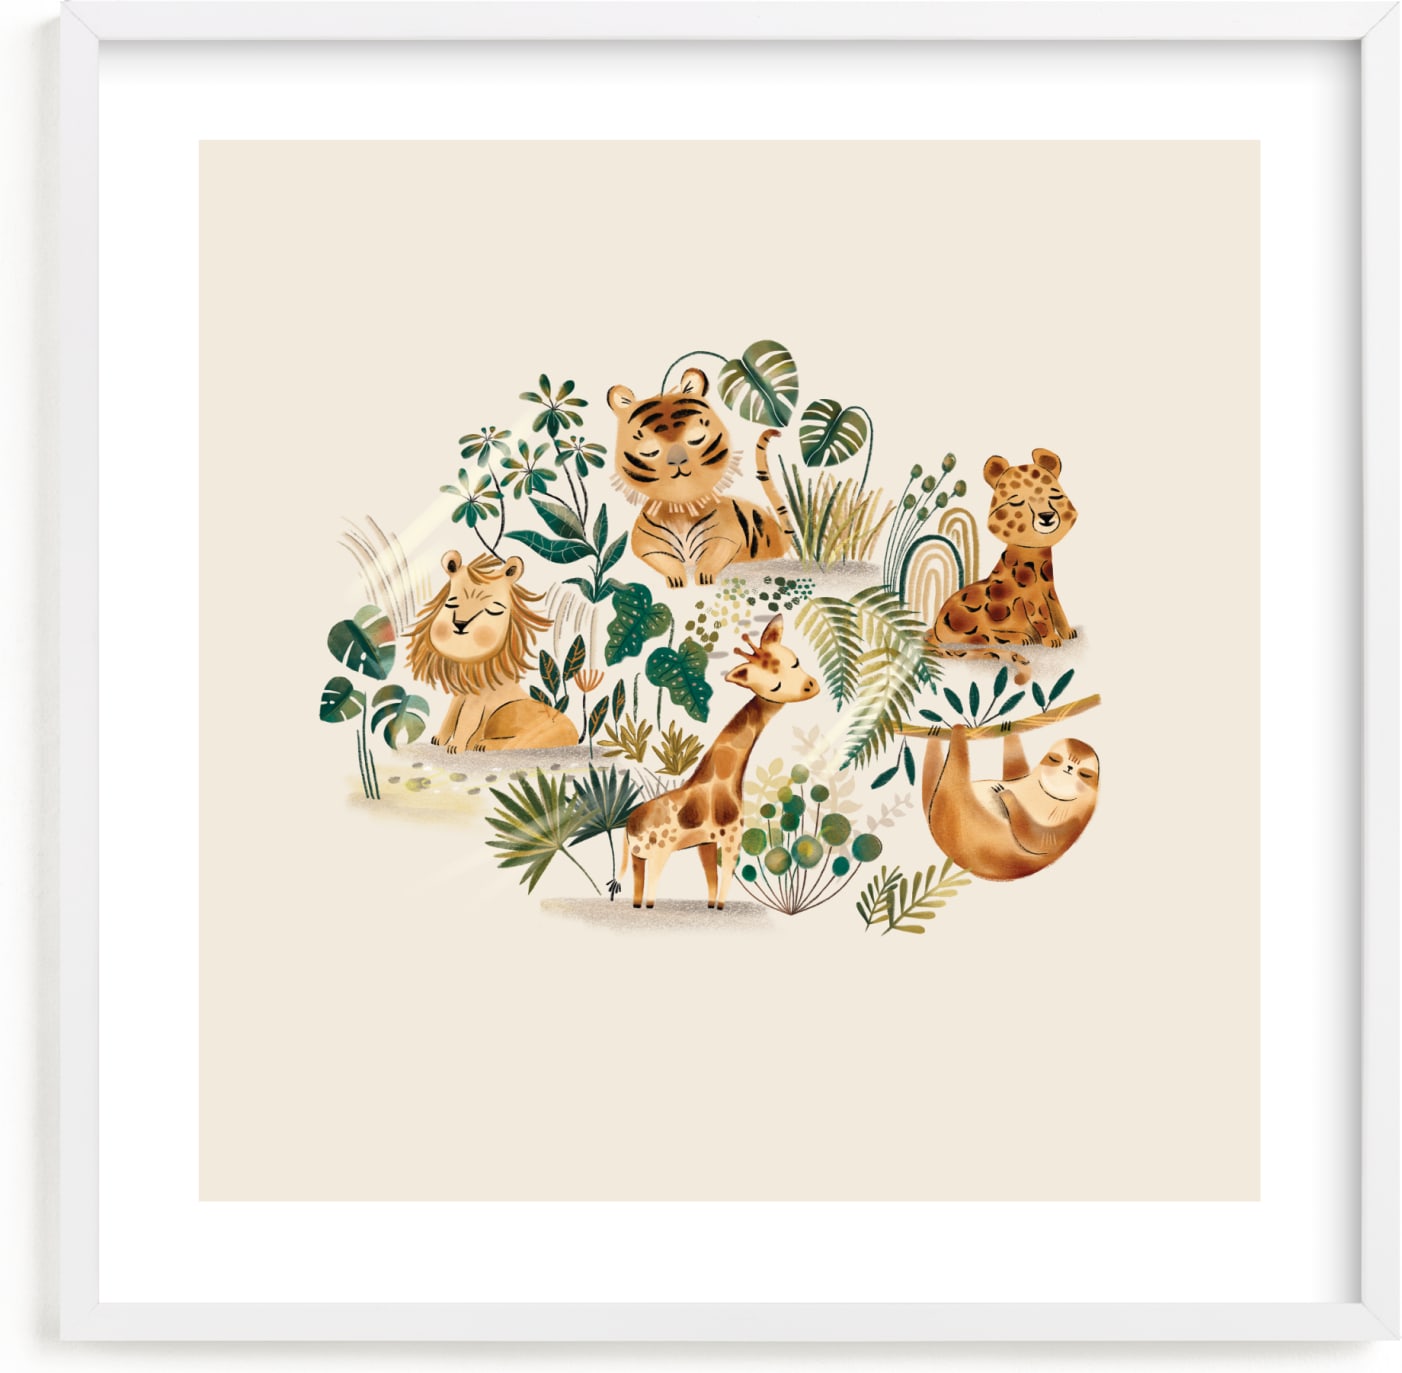 This is a brown nursery wall art by Vivian Yiwing called wild.